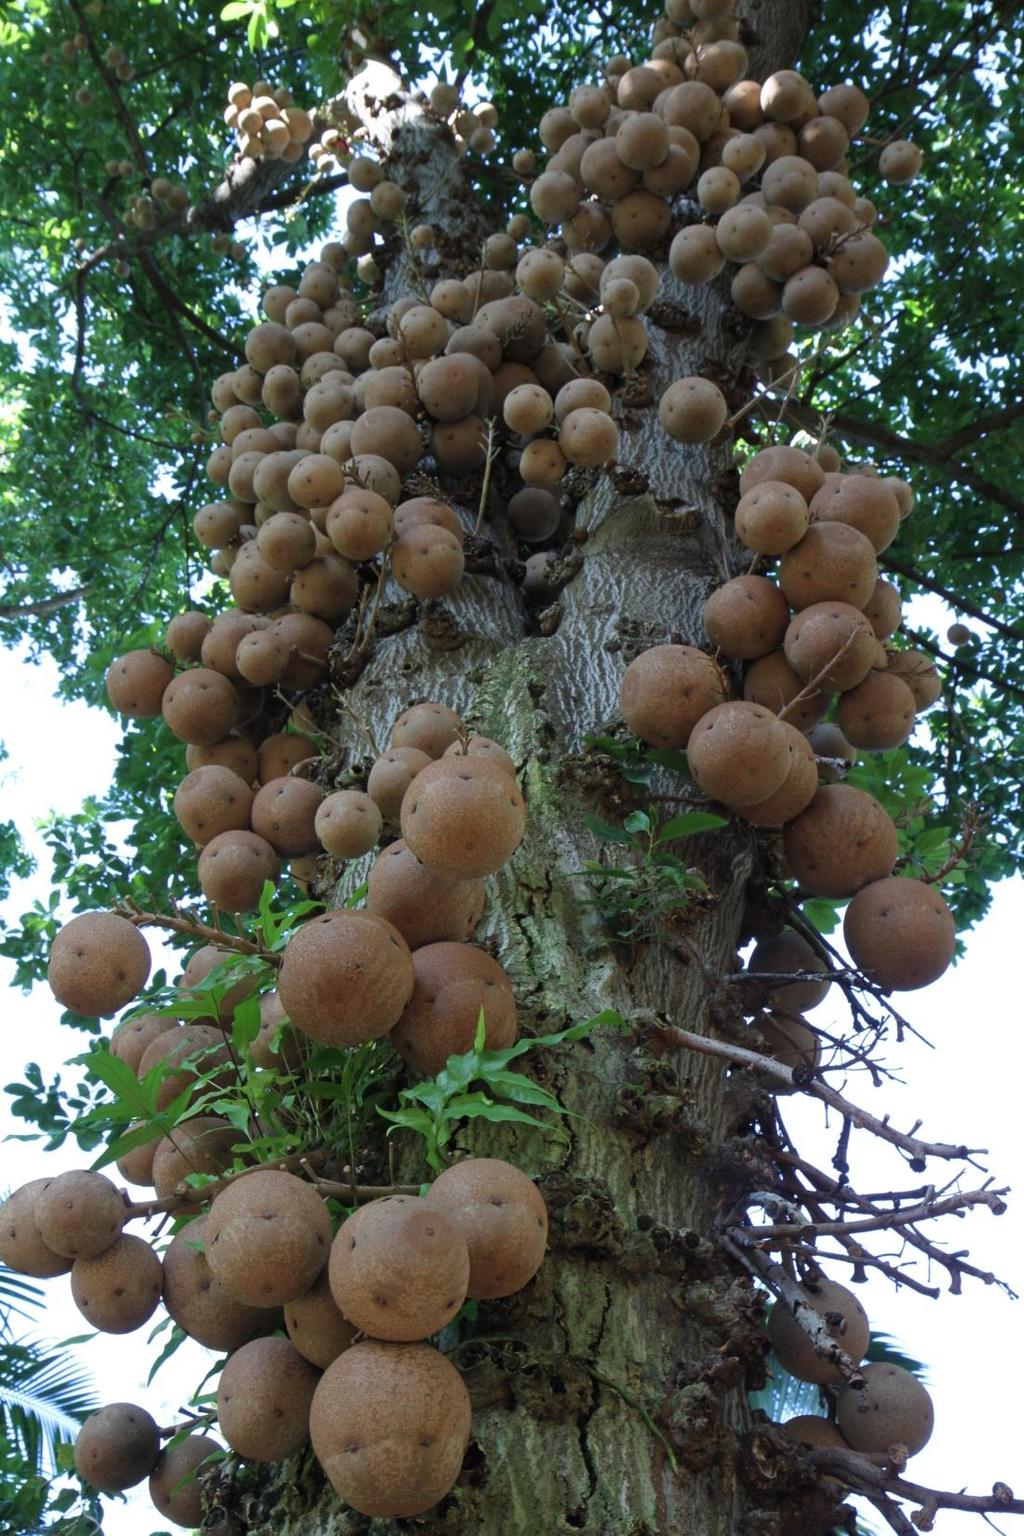 The cannonball tree